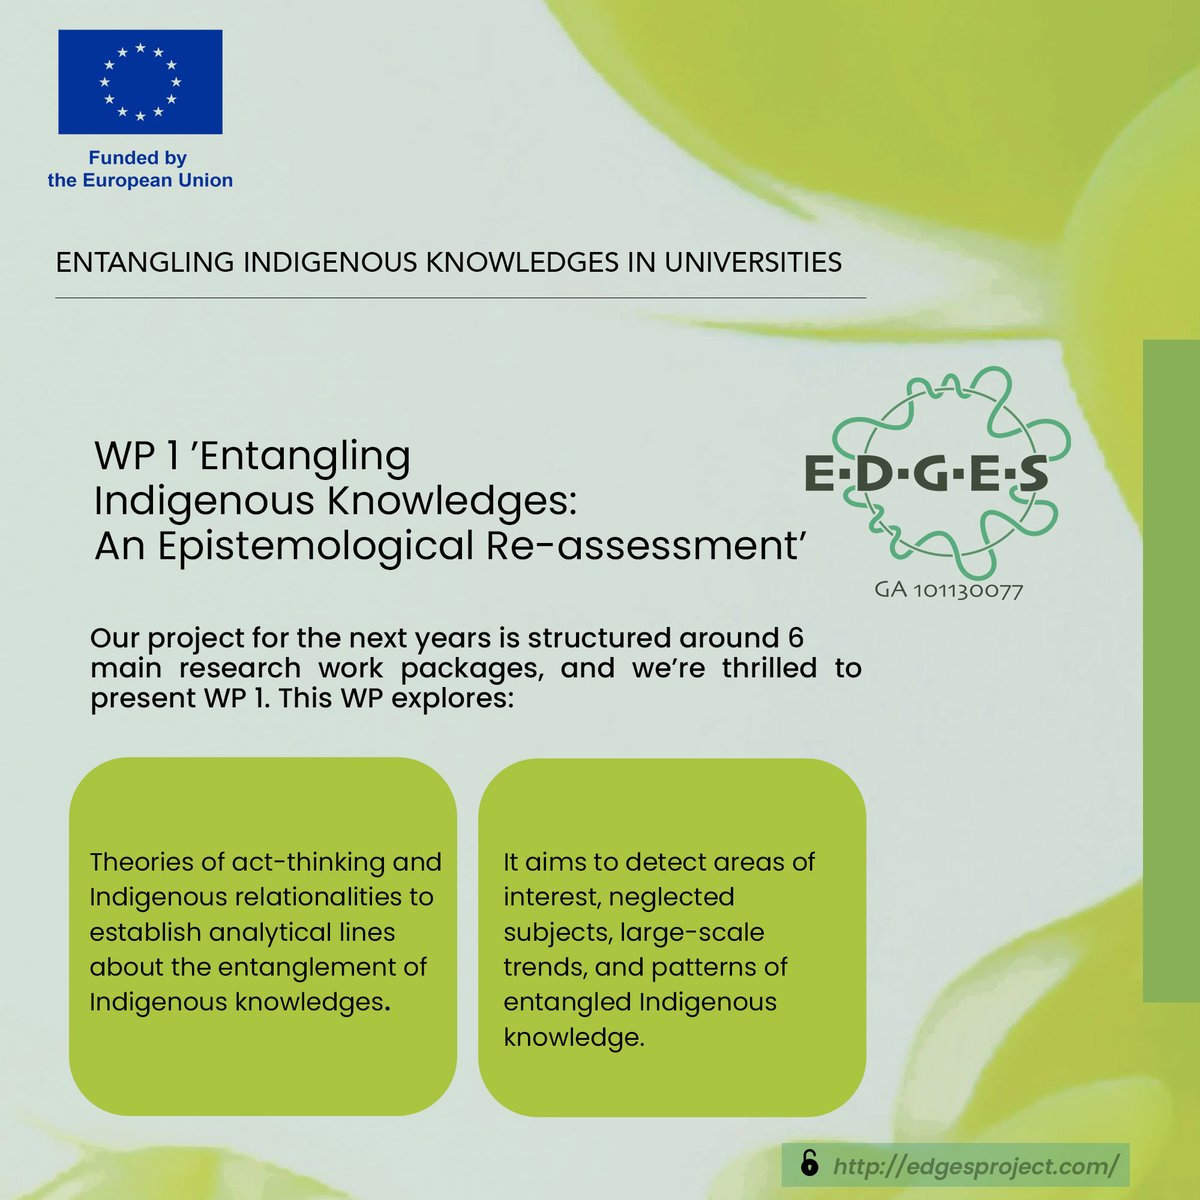 Our project is structured around 6 main research work packages, and we’re thrilled to present WP 1, ‘Entangling Indigenous Knowledges. Meet our WP leaders: edgesproject.com #IndigenousKnowledges #Indigenous #Ecologies #Epistemologies #PolicyMaking #Education #Ethnohistory